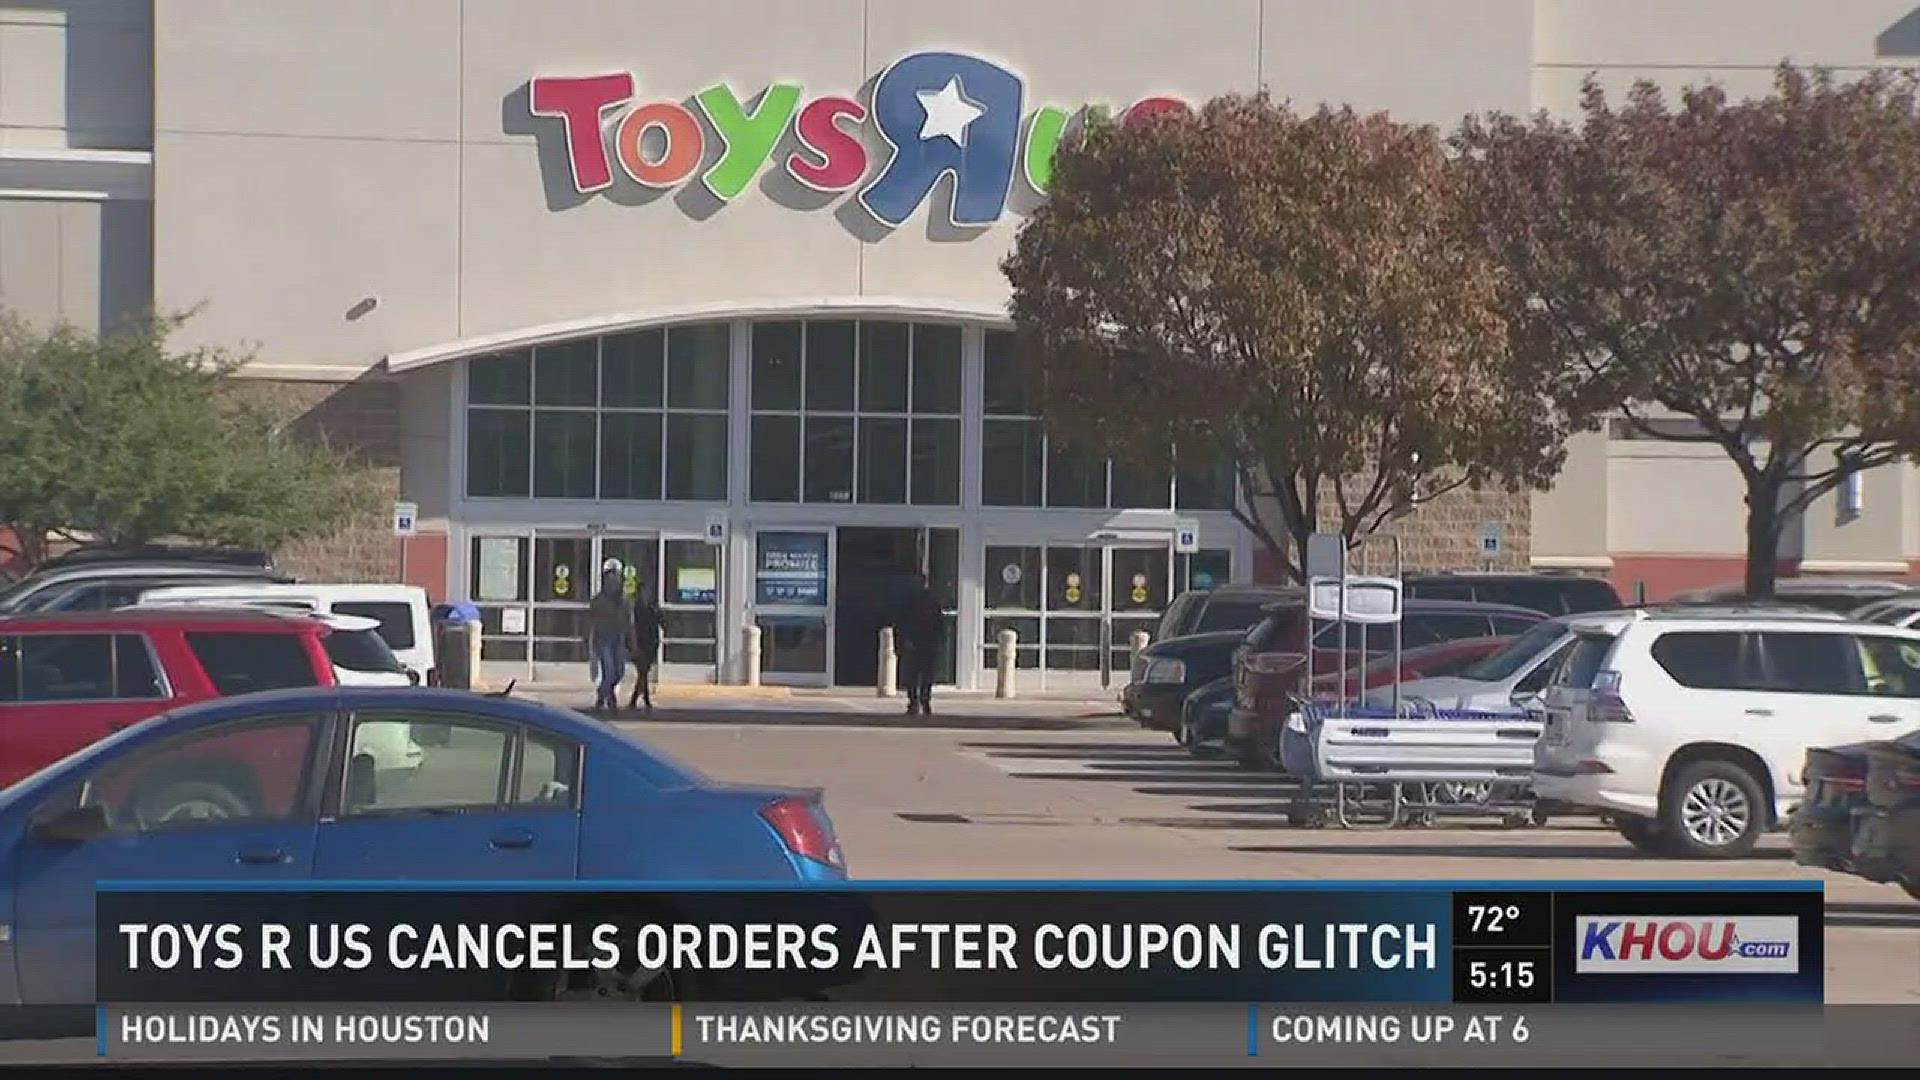 There are a lot of angry parents after Toys R Us cancelled online orders, blaming an online coupon glitch. But parents want the retailer to honor their mistake.